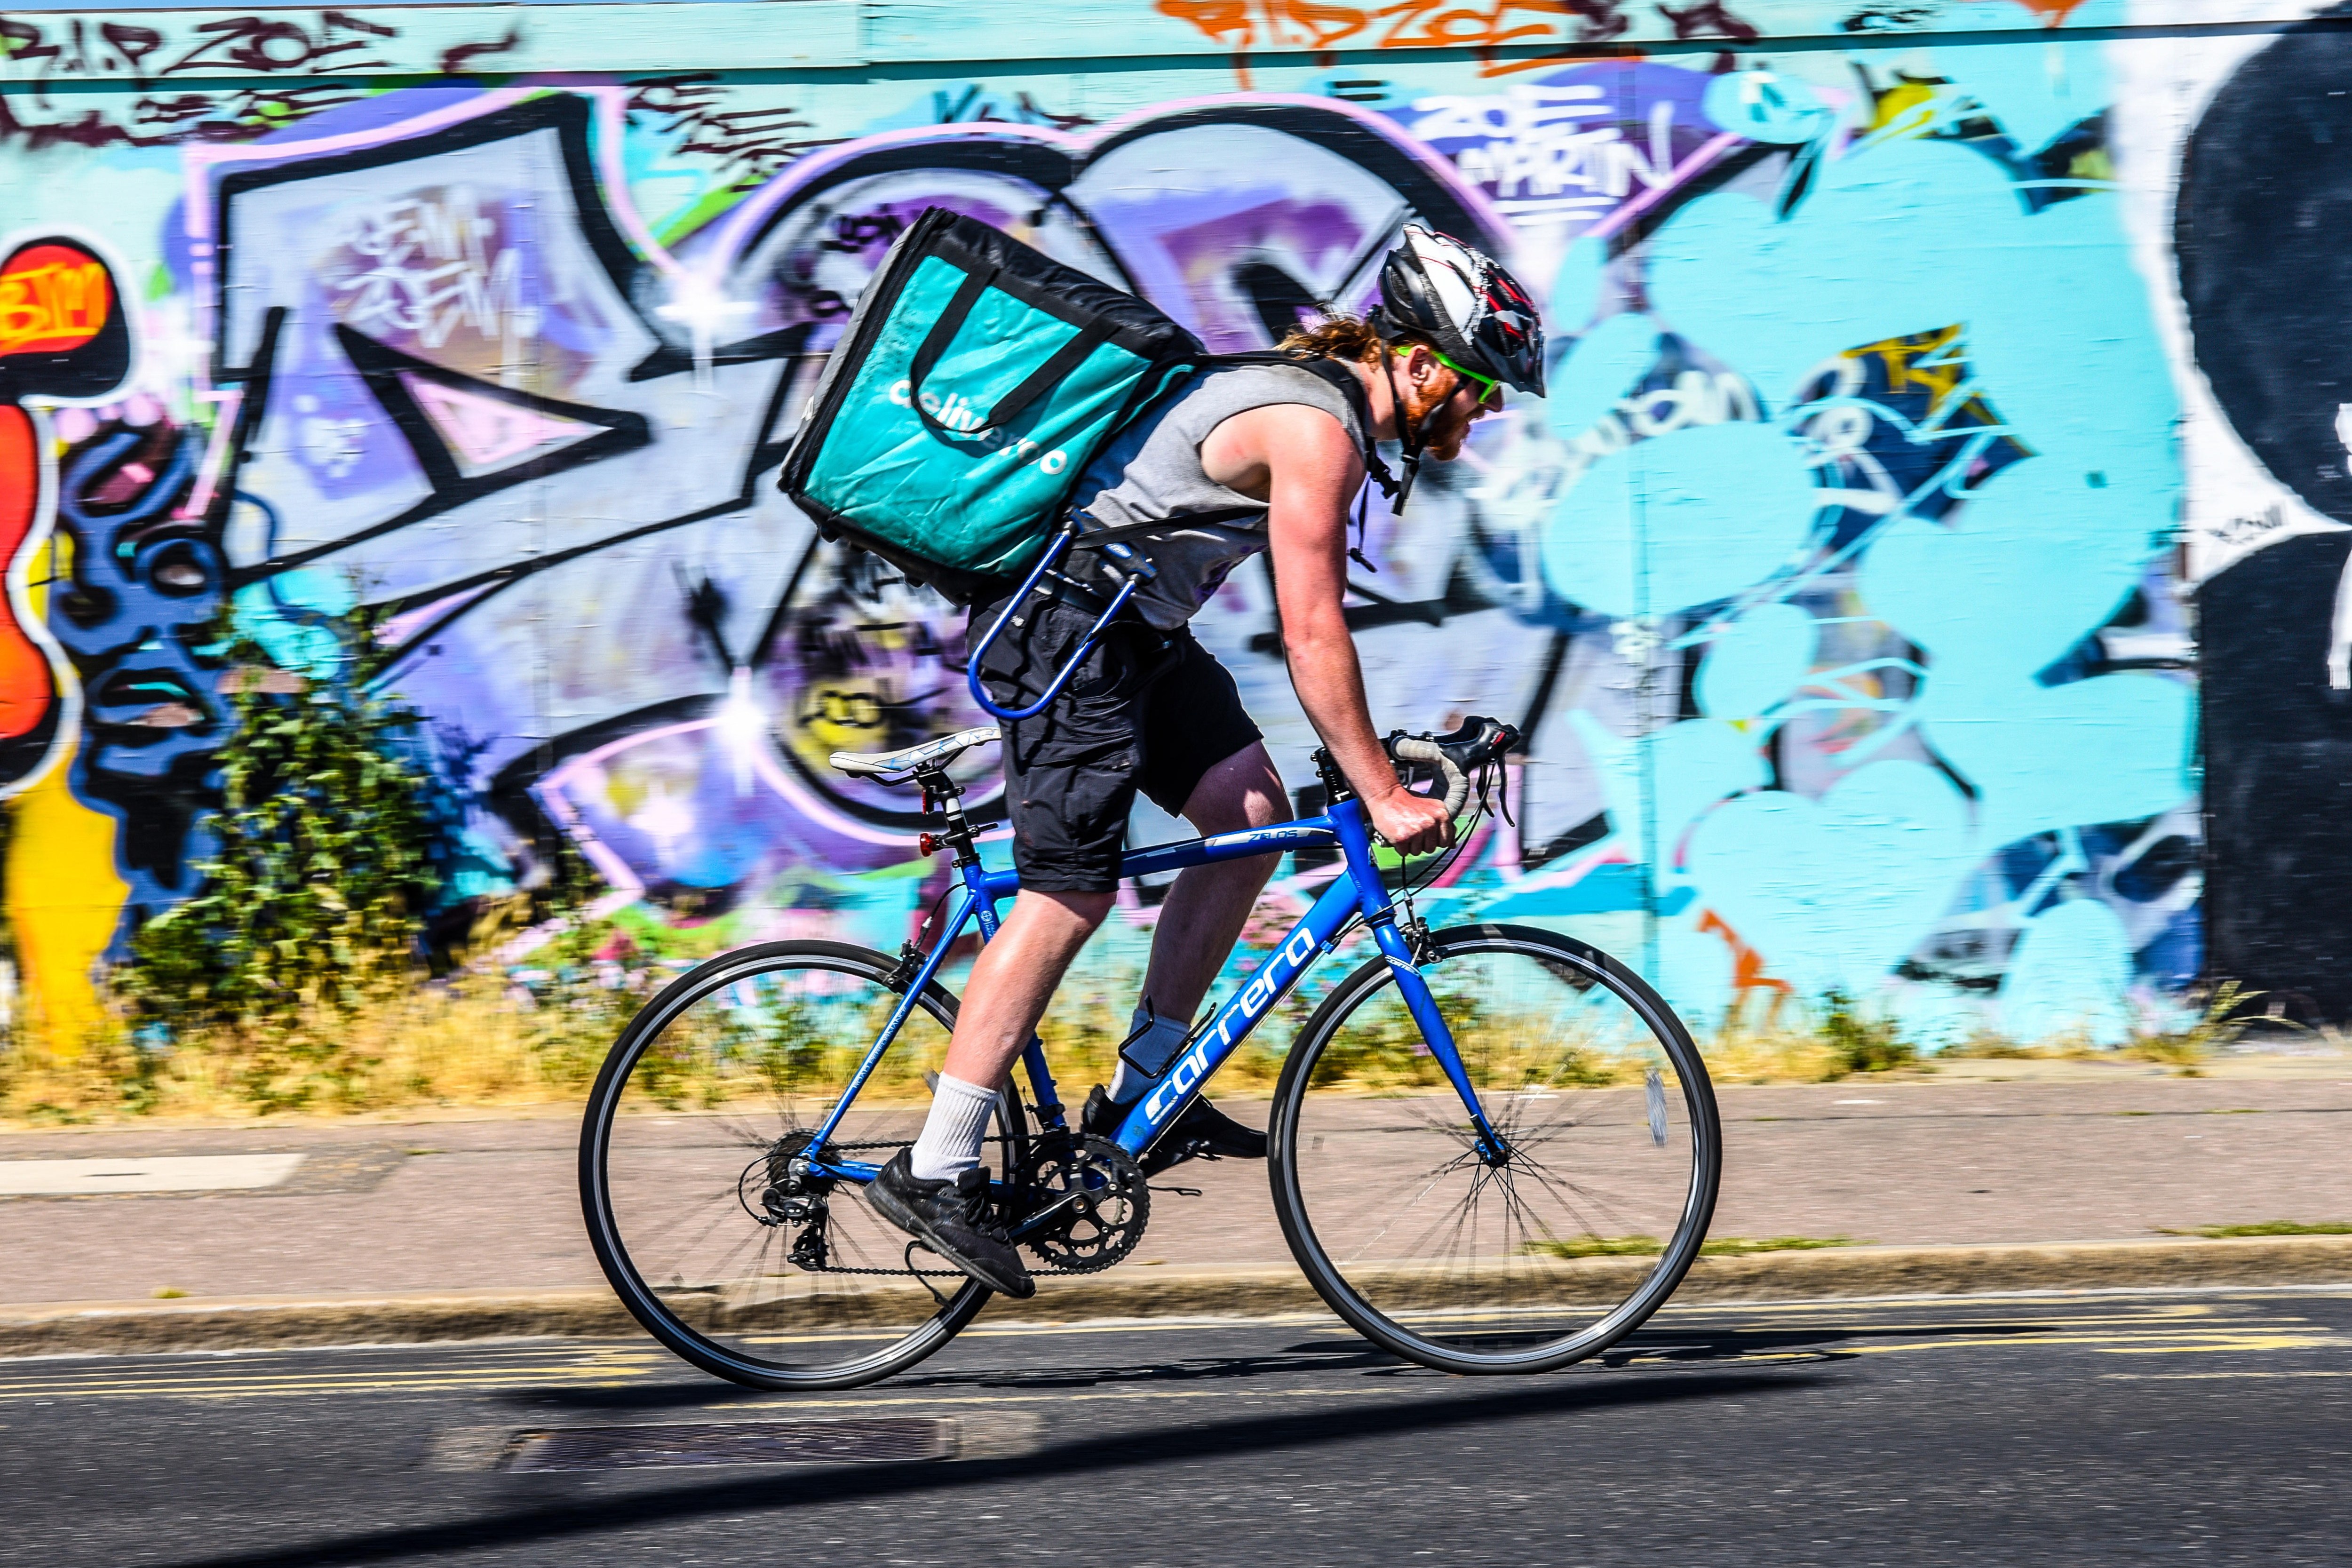 Virtual Deliveroo driver is tracking workers’ earnings